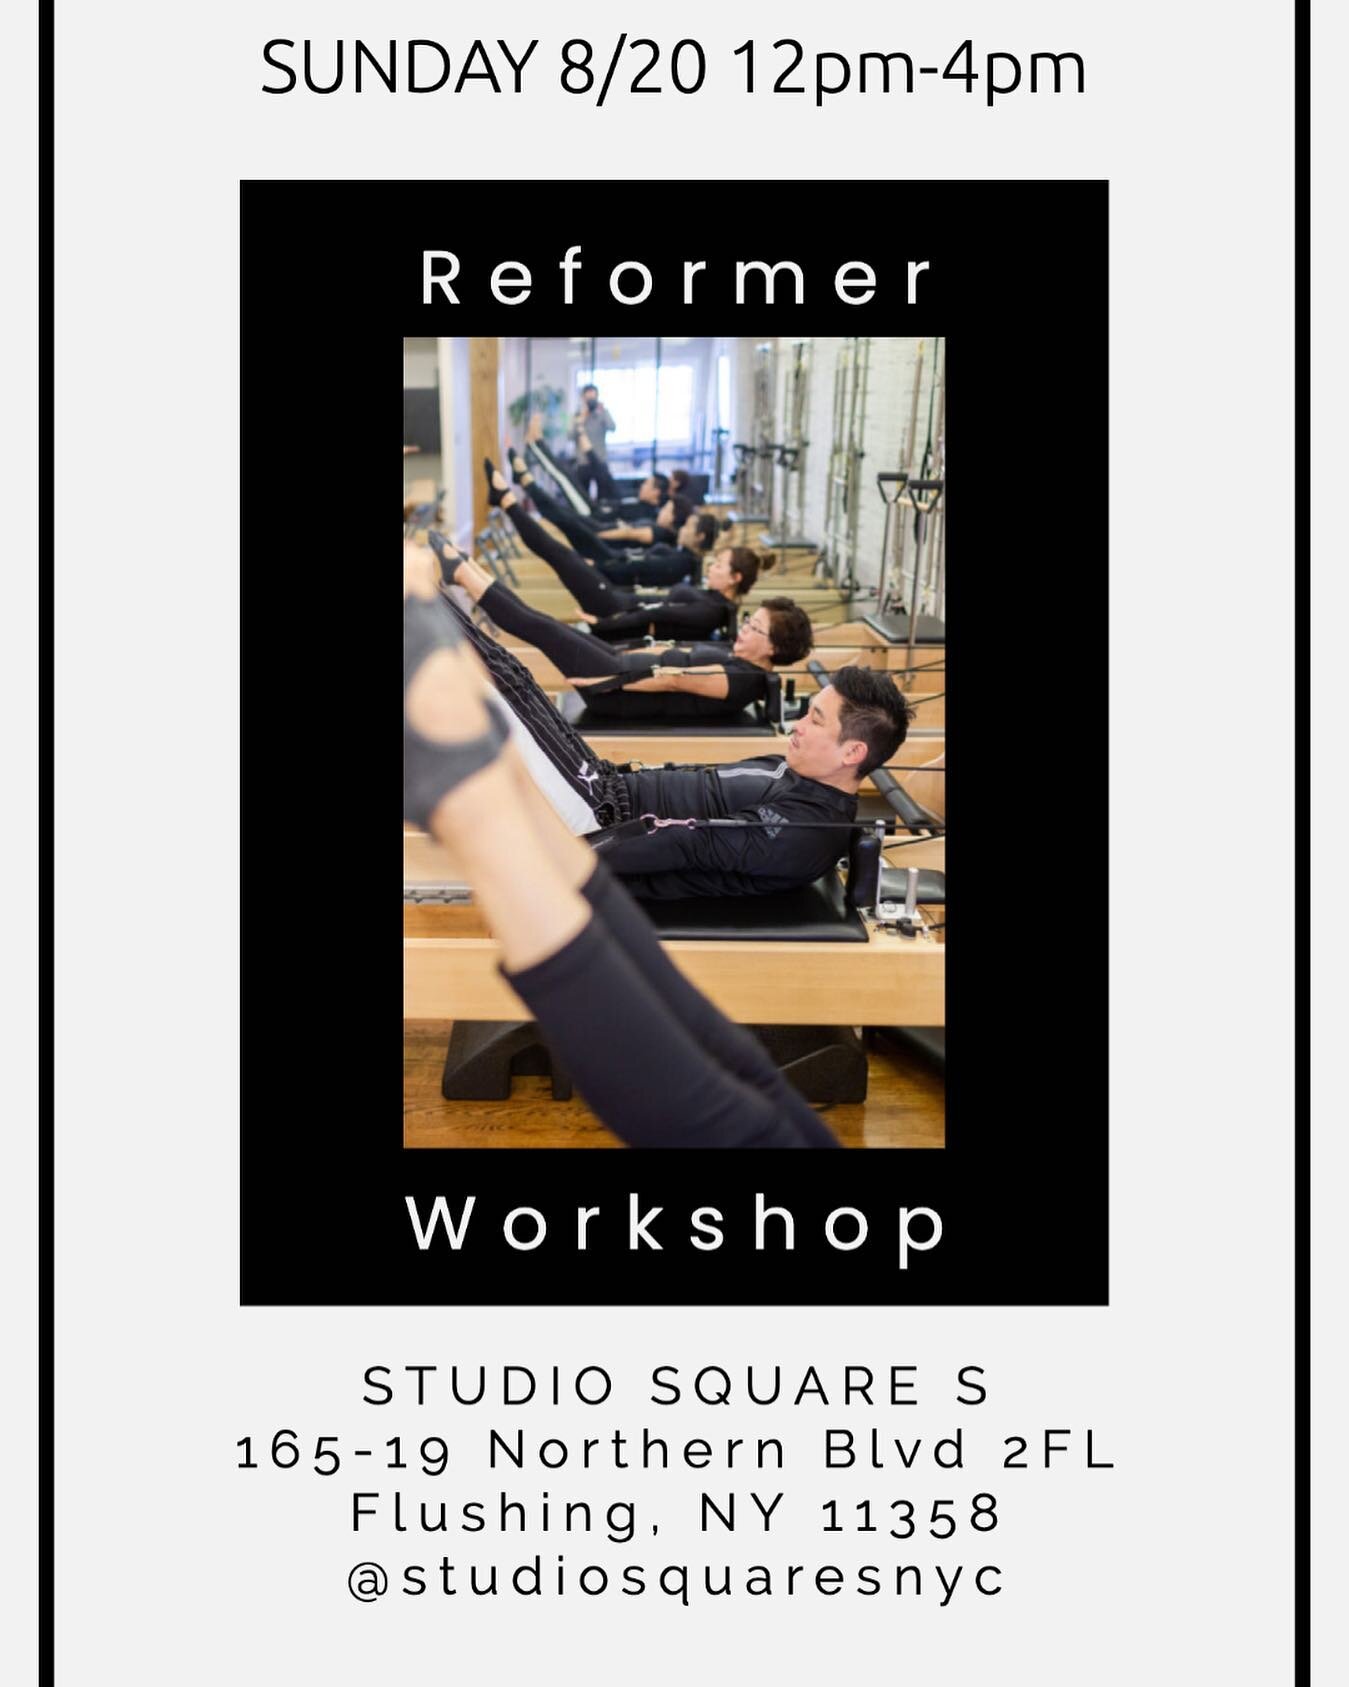 The Free Pilates Community Project will be at Studio Square S 8/20 from 12-4. 

We believe there should be a free sharing of Pilates within the community and time to join together doing what we love without monetization or discrimination. 

We have h